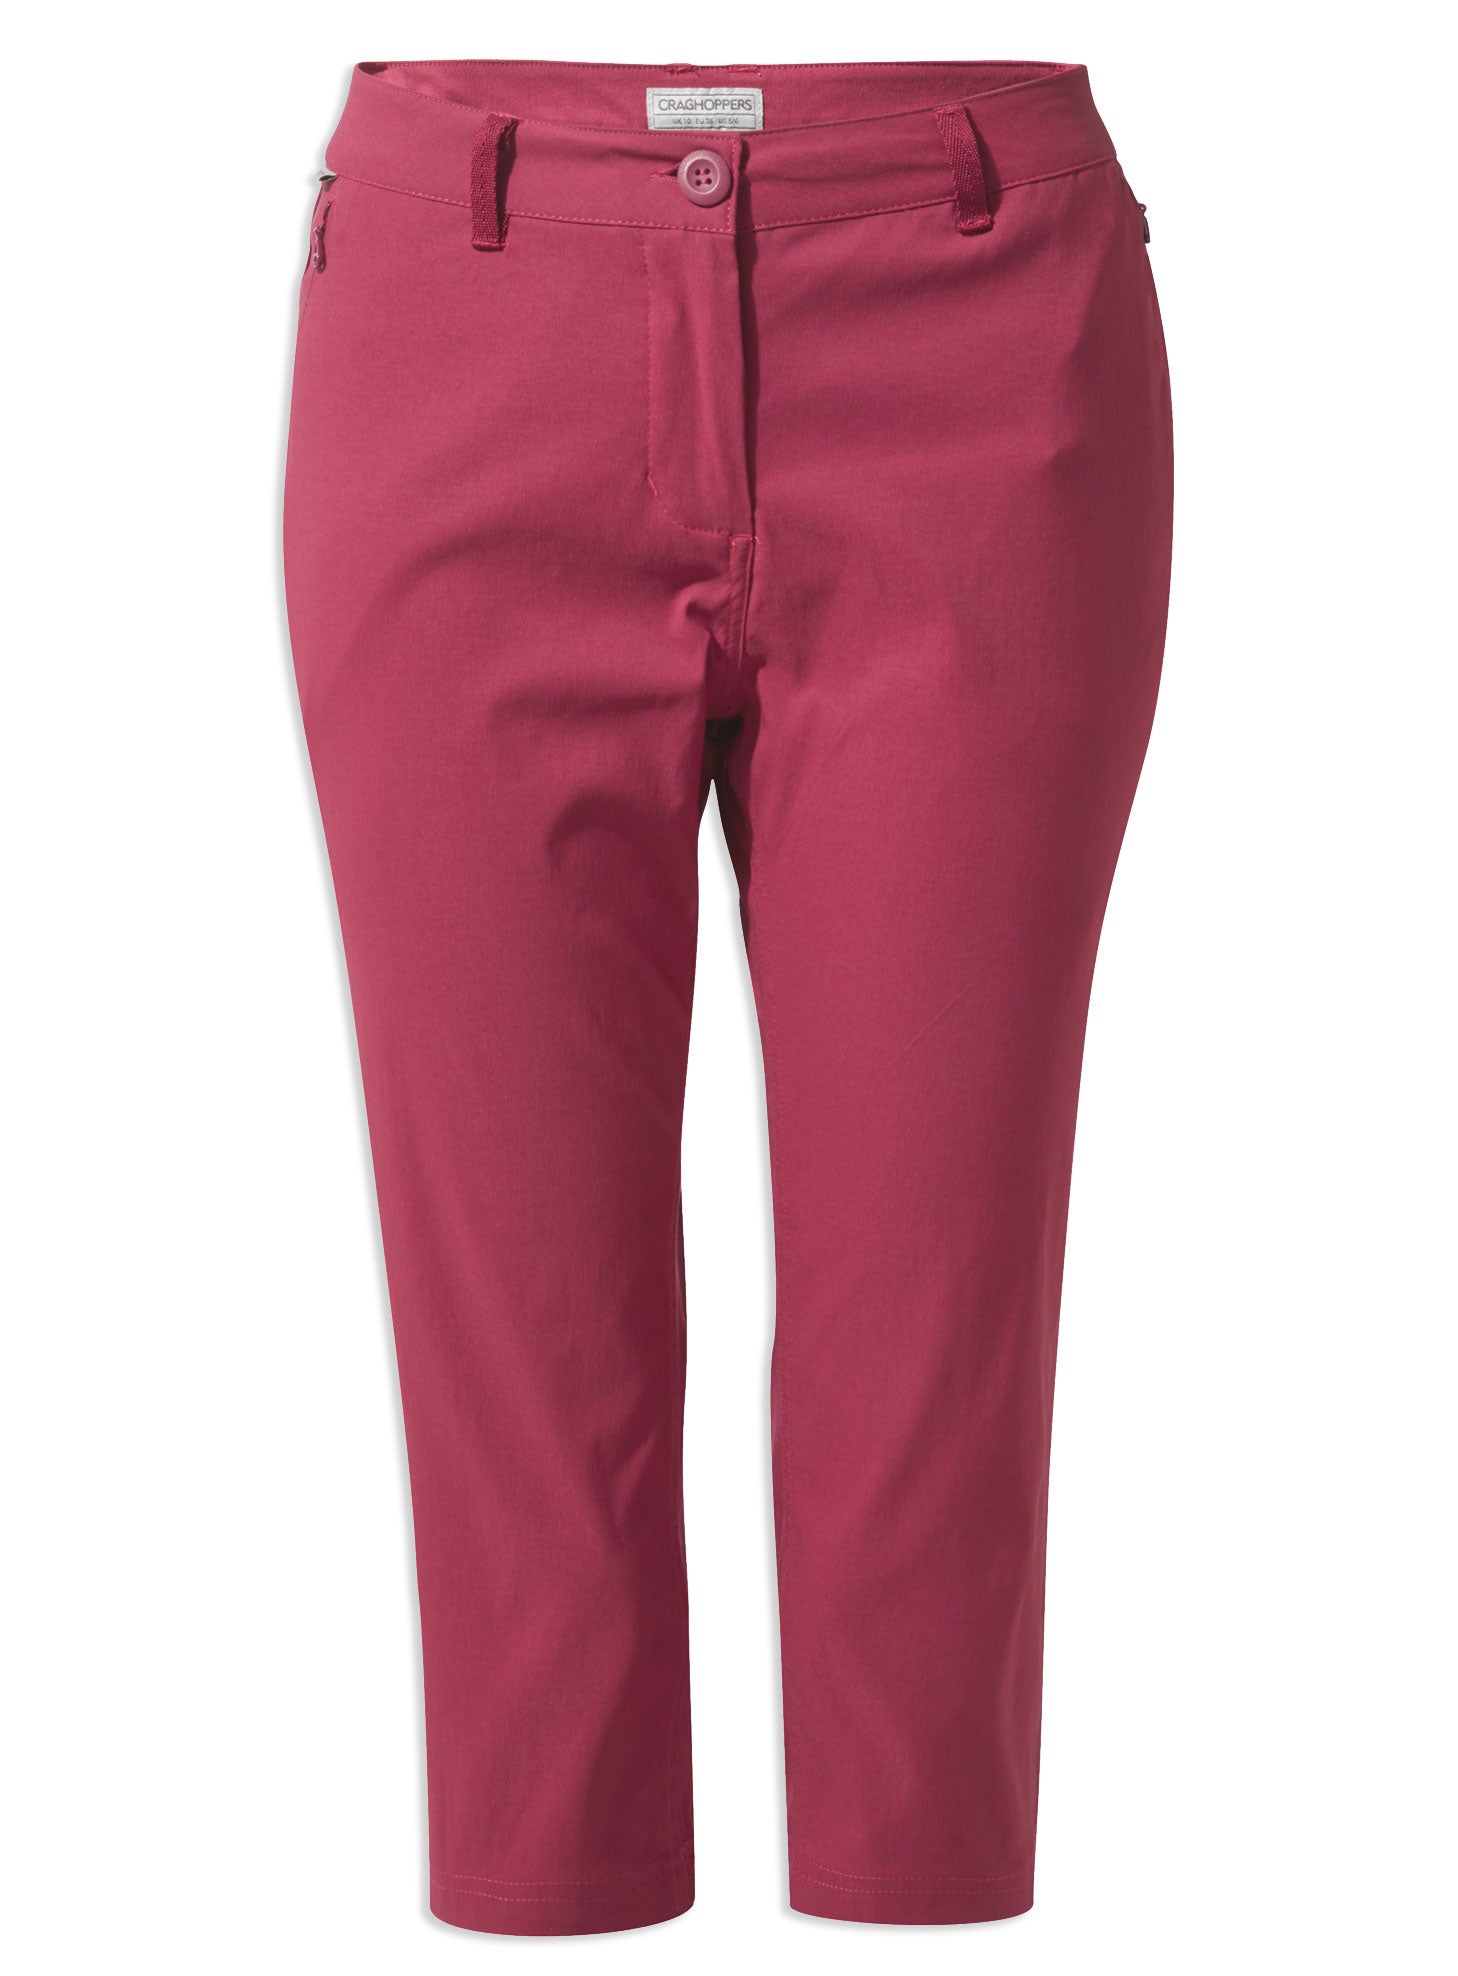 Craghoppers Kiwi II Classic trousers ladies | WISE Worksafe